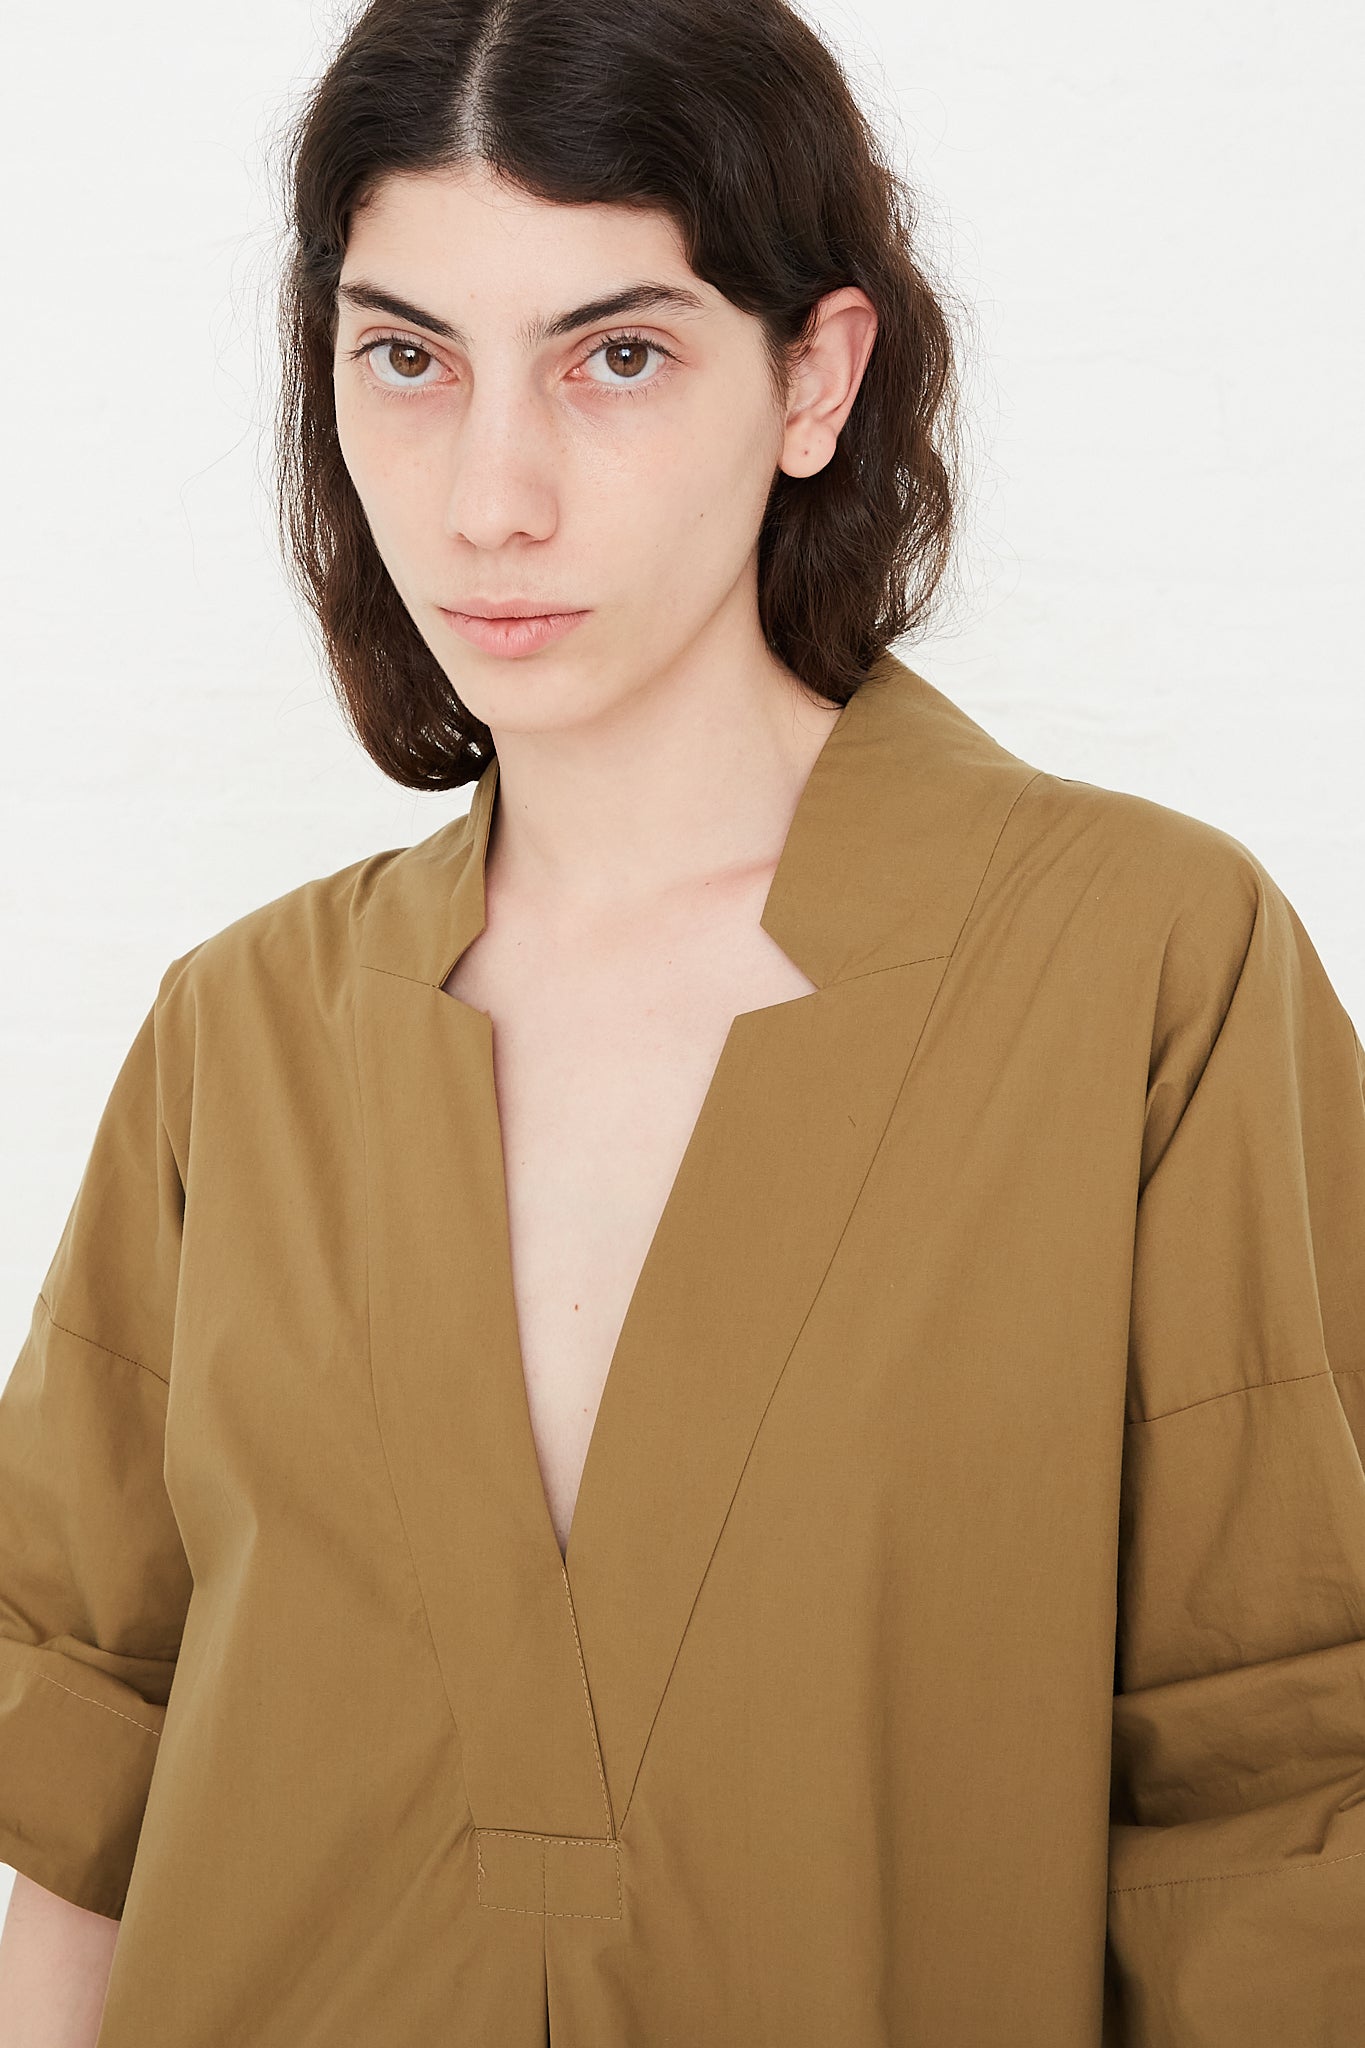 Rachel Comey Copake Dress in Gold neck opening front detail